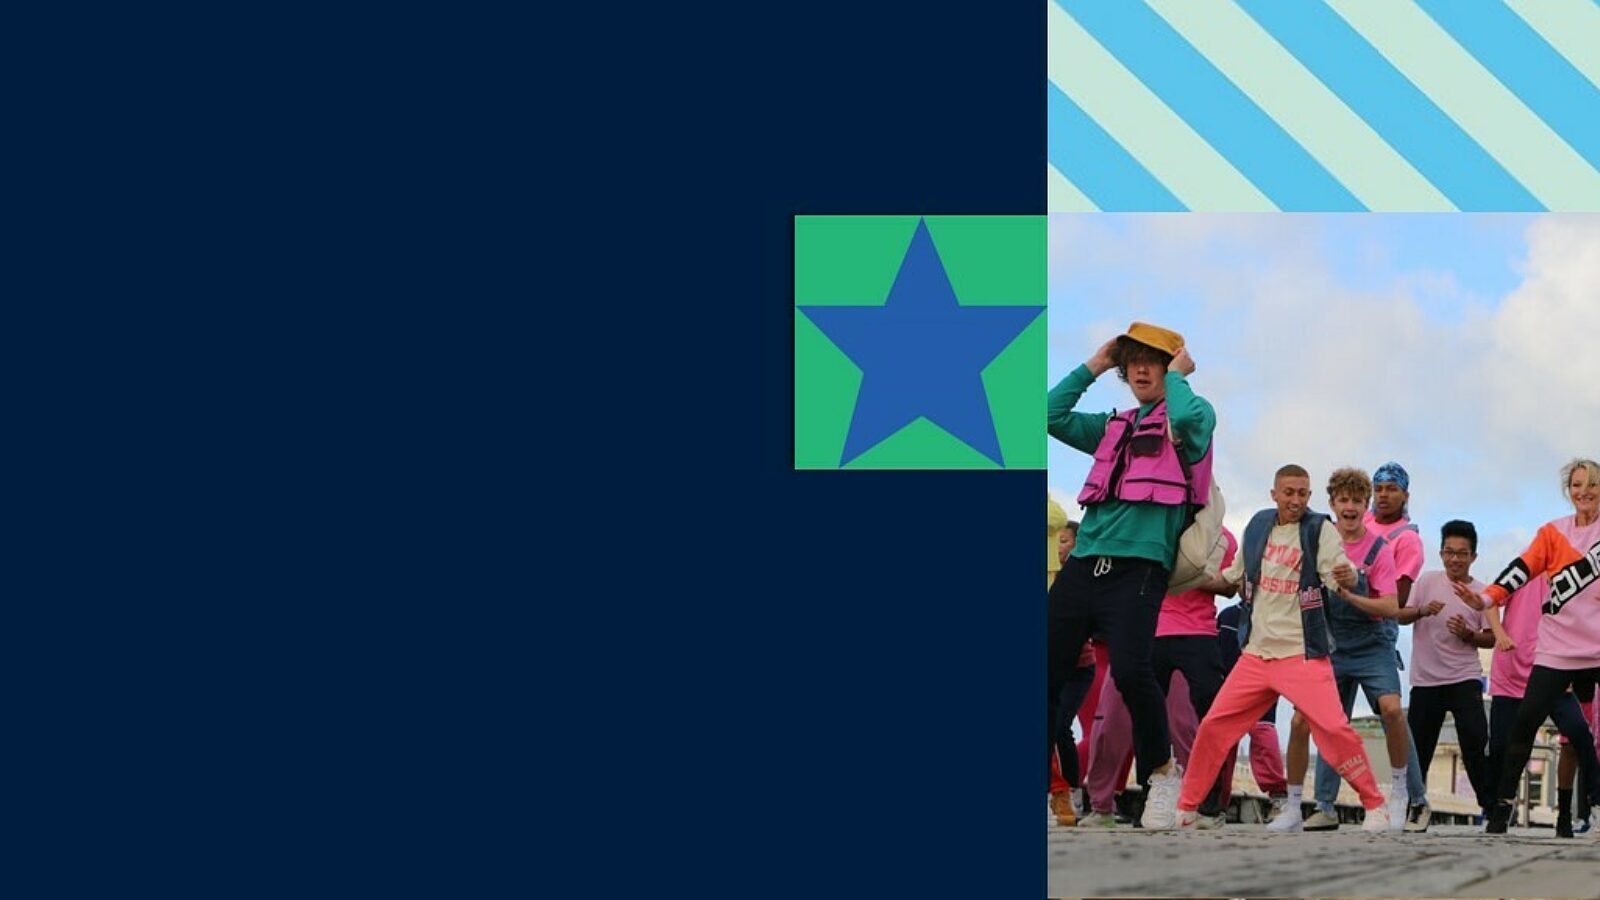 Blue star in green block next to an image of a group on dancers dressed in bright colours.